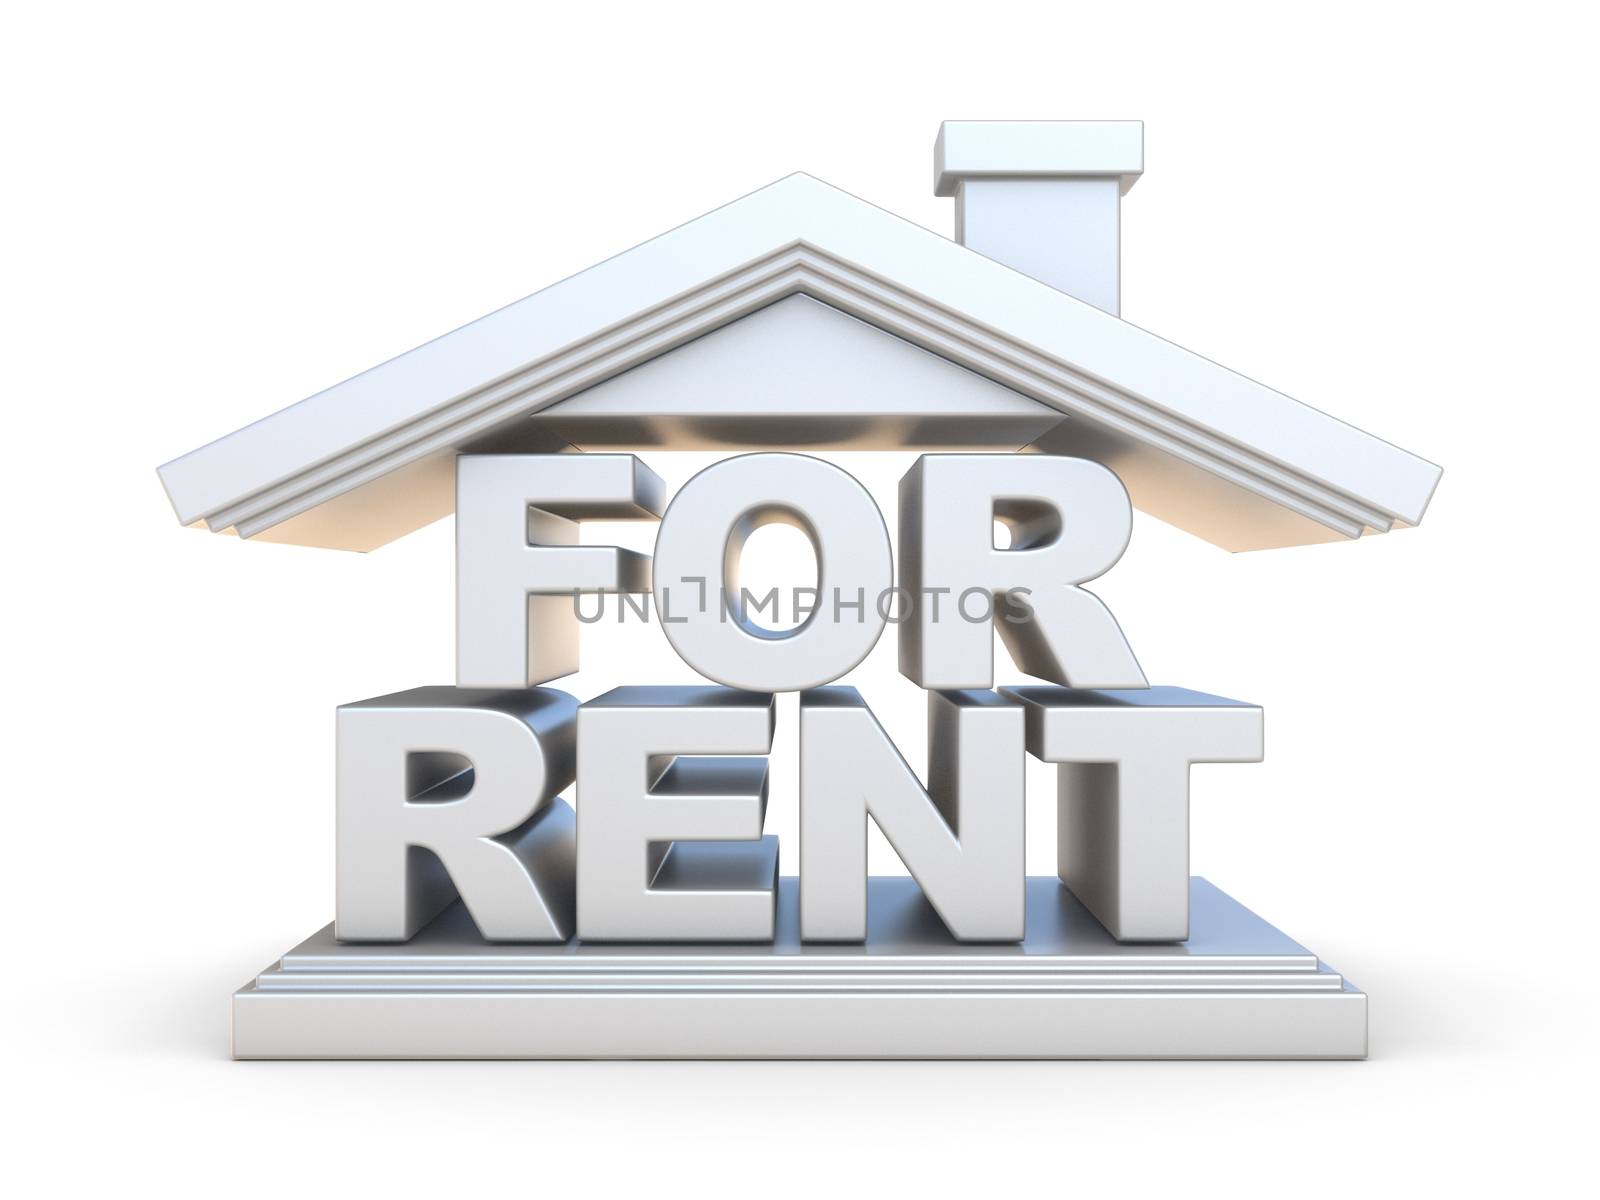 FOR RENT house sign front view 3D render illustration isolated on white background